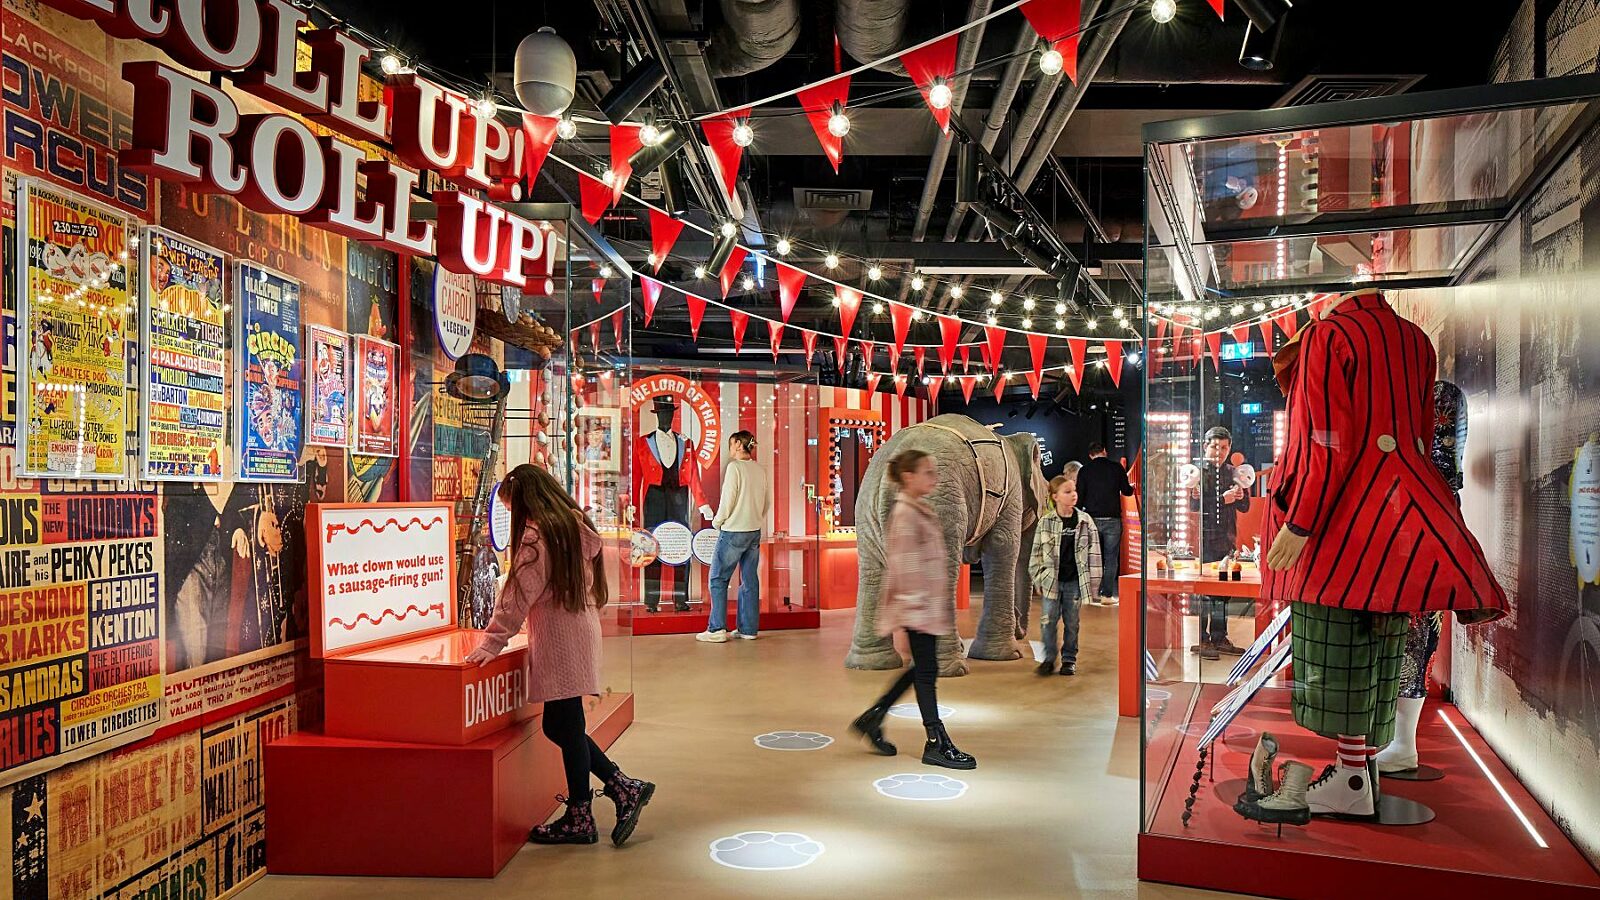 Image of Roll up gallery with family exploring circus related objects including clown and ring master costumes.